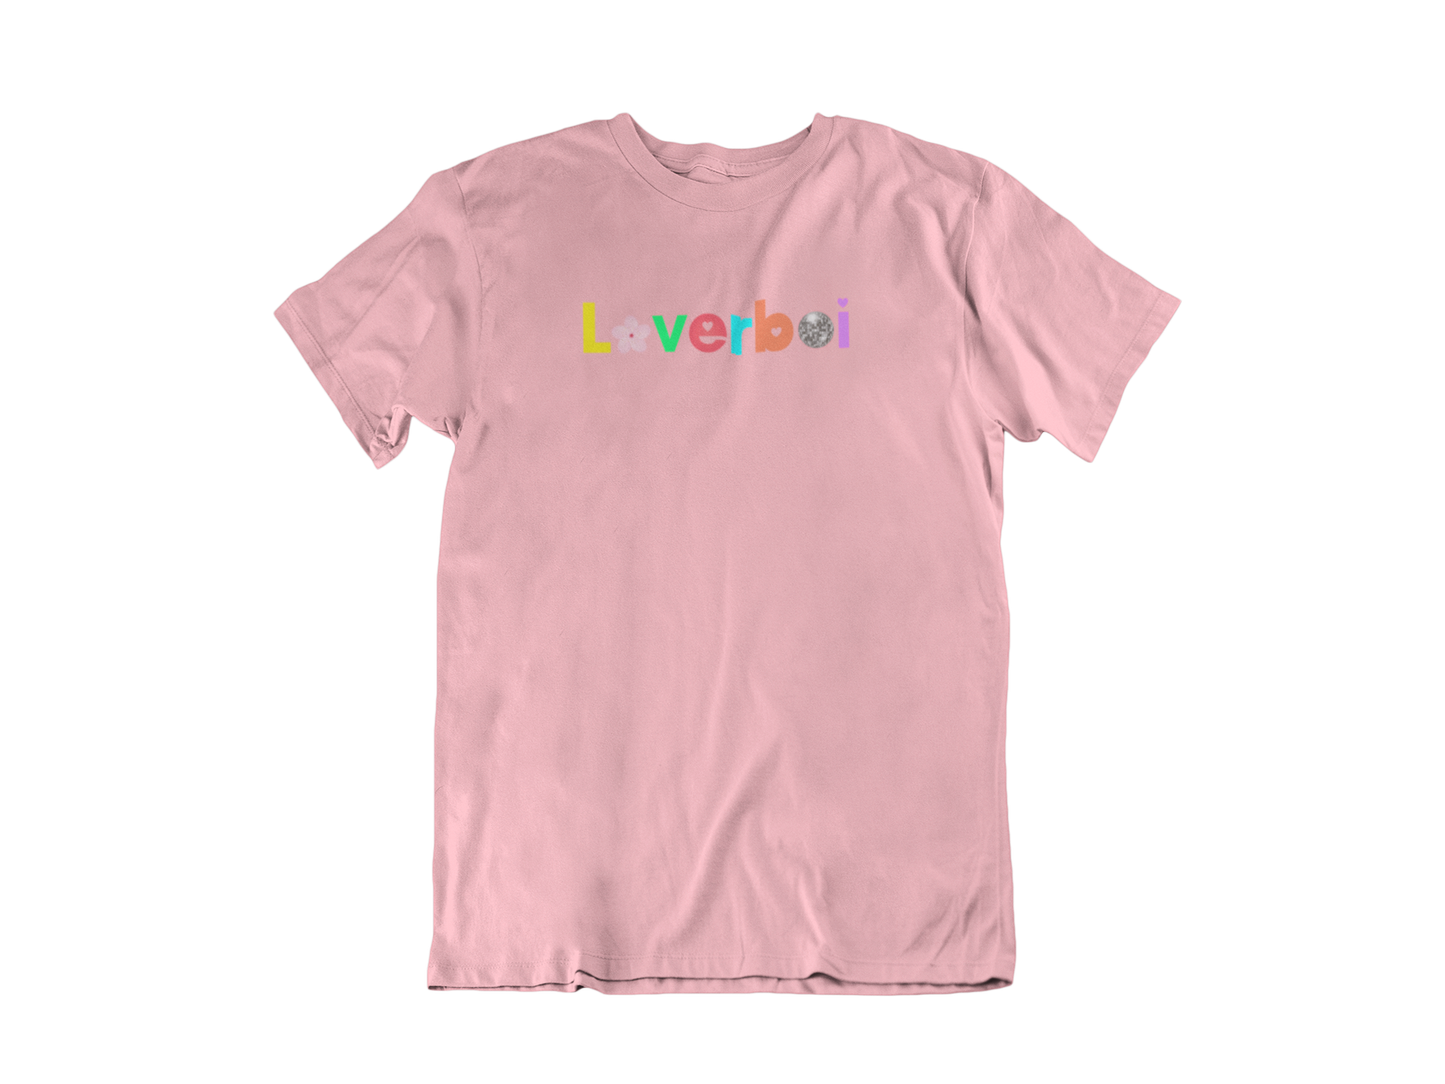 The Classic Loverboi Tee